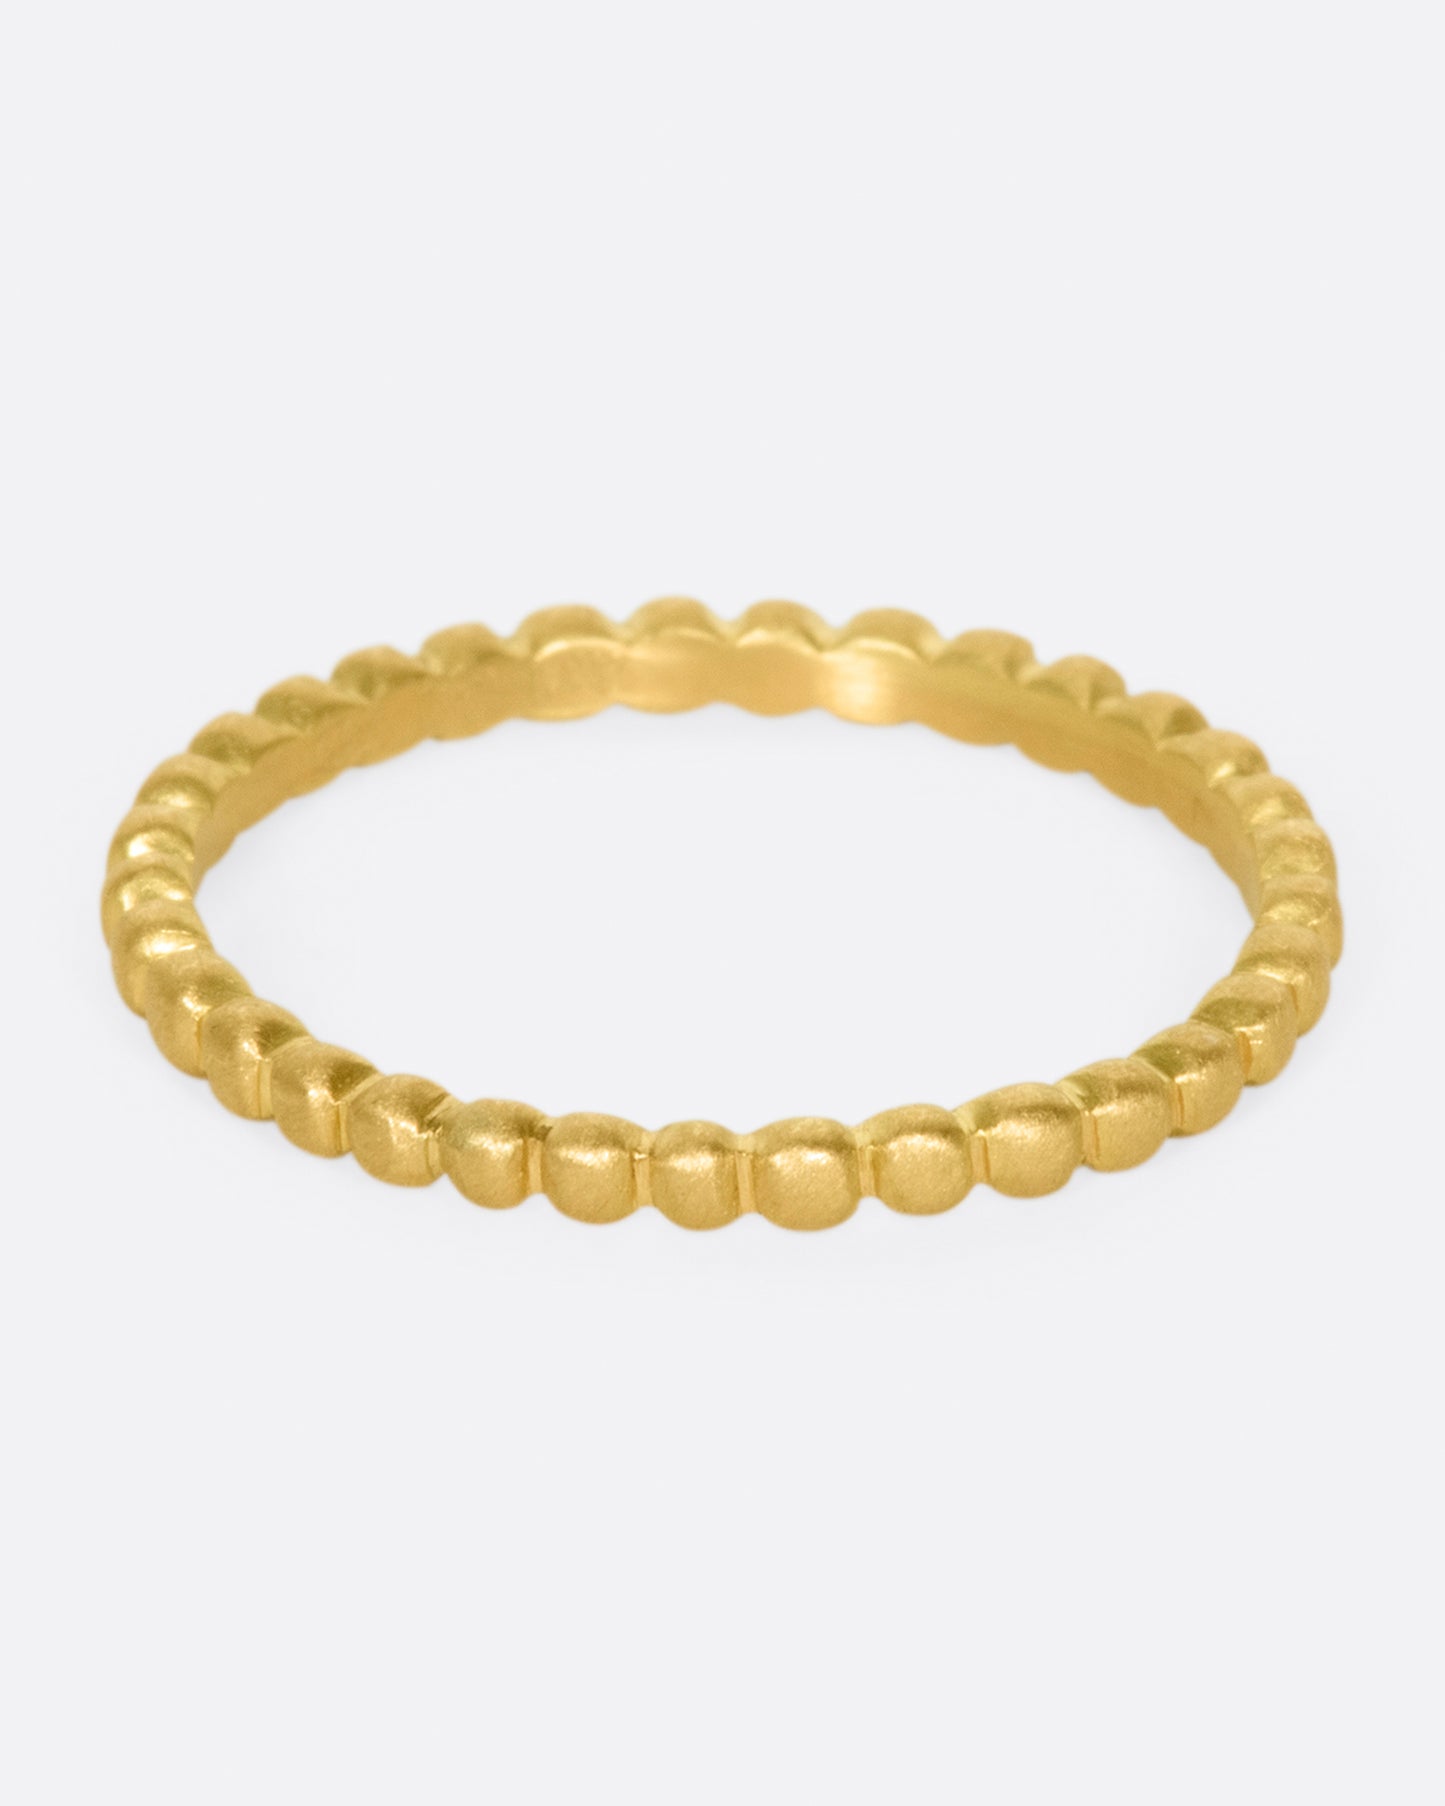 A matte gold eternity band made from dots of gold.